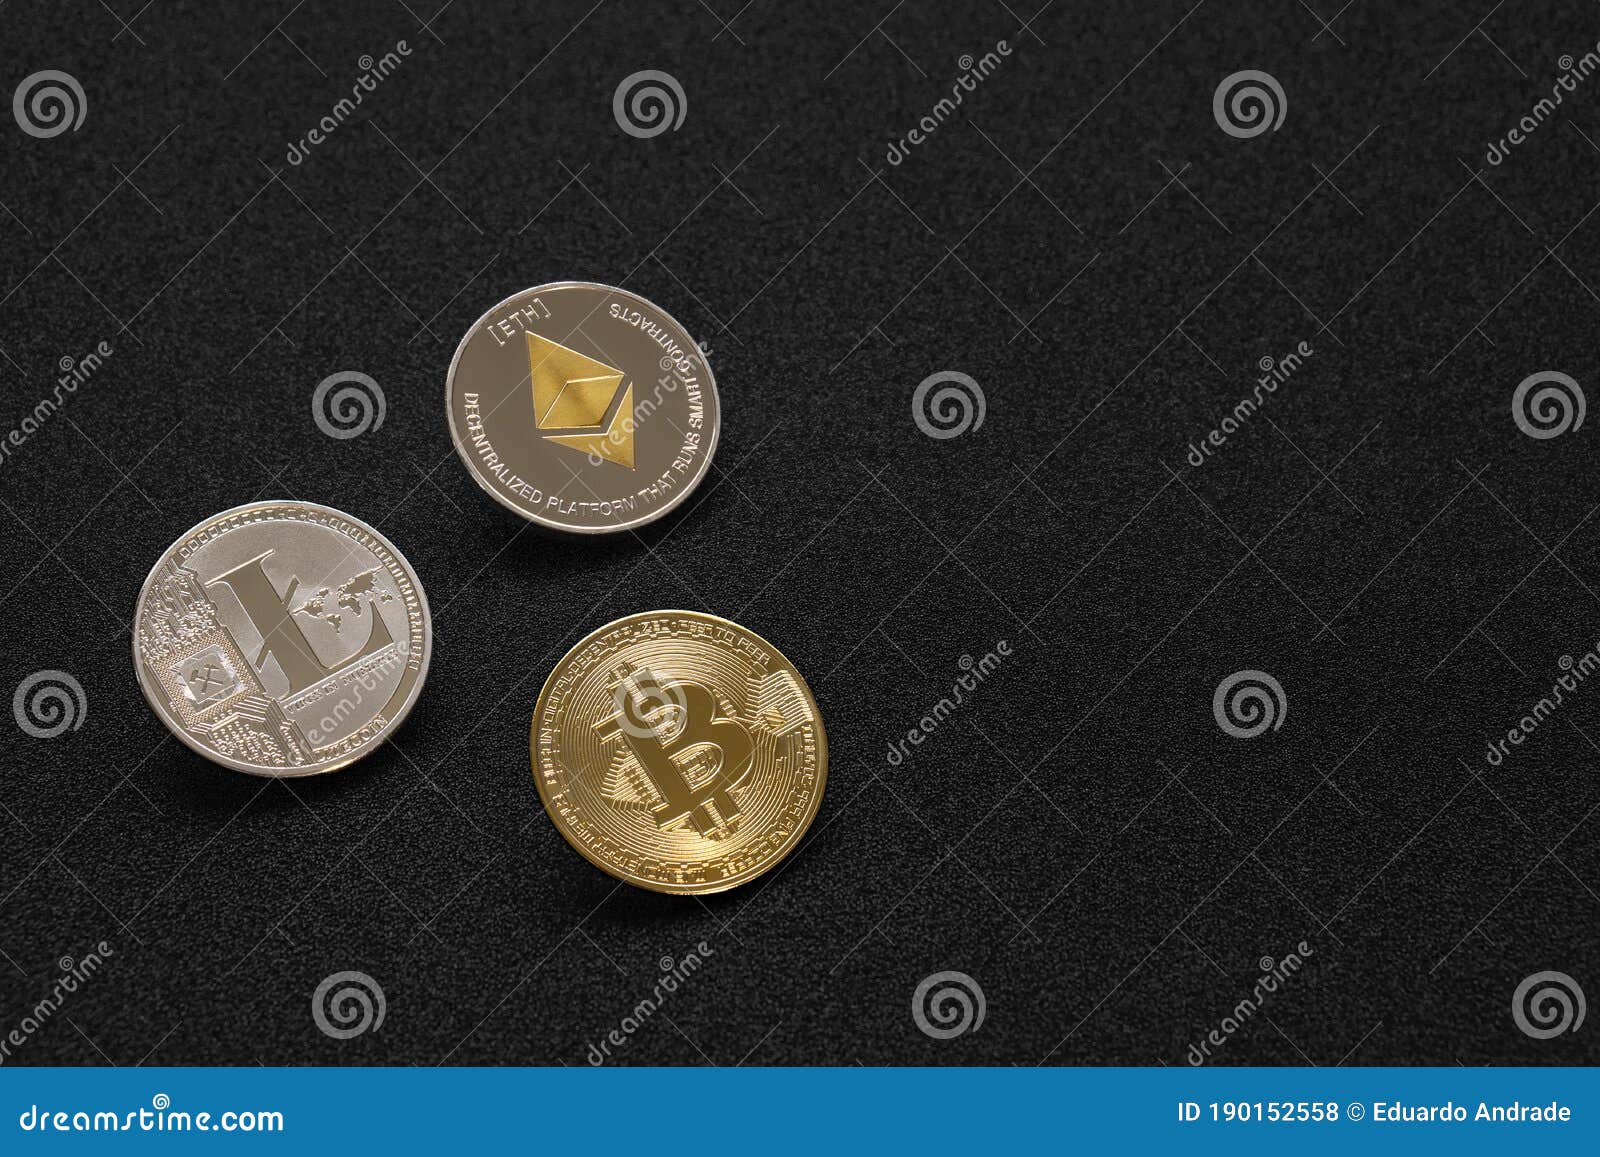 Colored coins ethereum bitcoin embassy canada